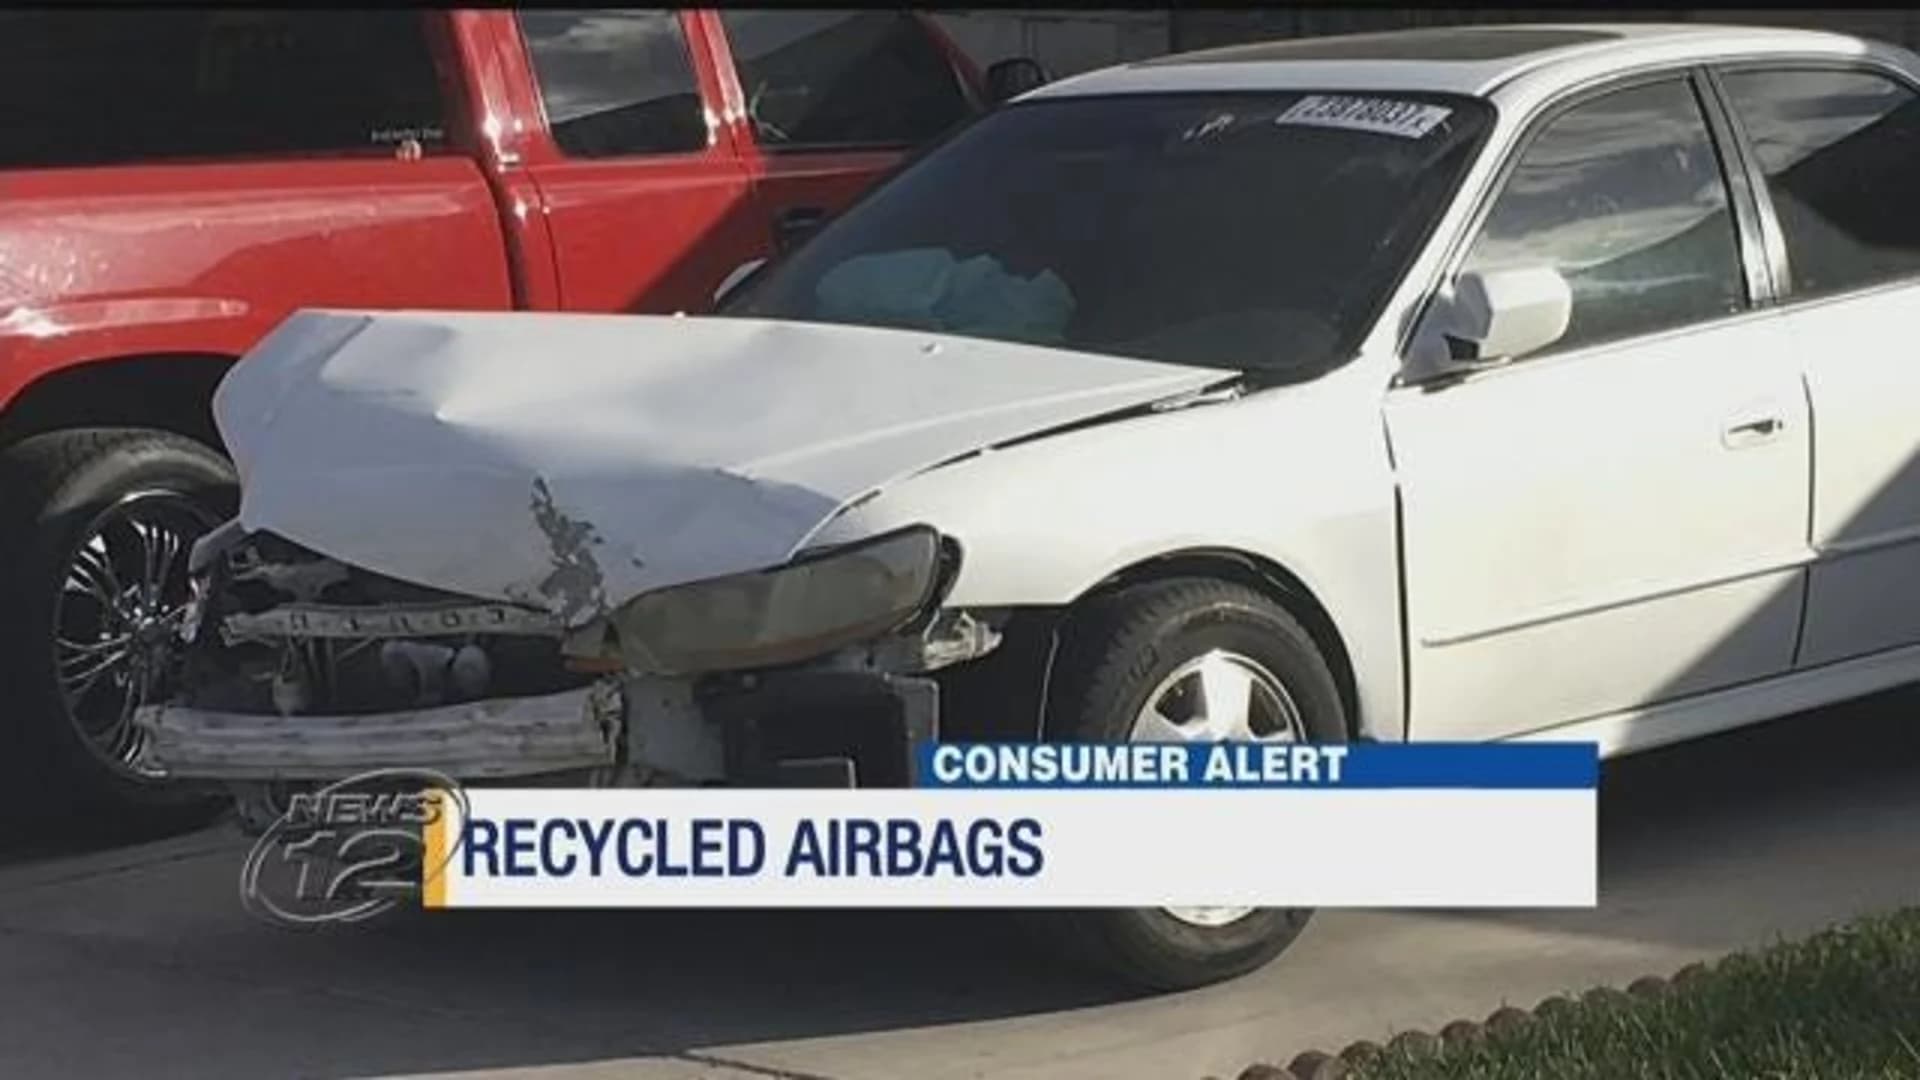 Consumer Alert: Recycled airbags